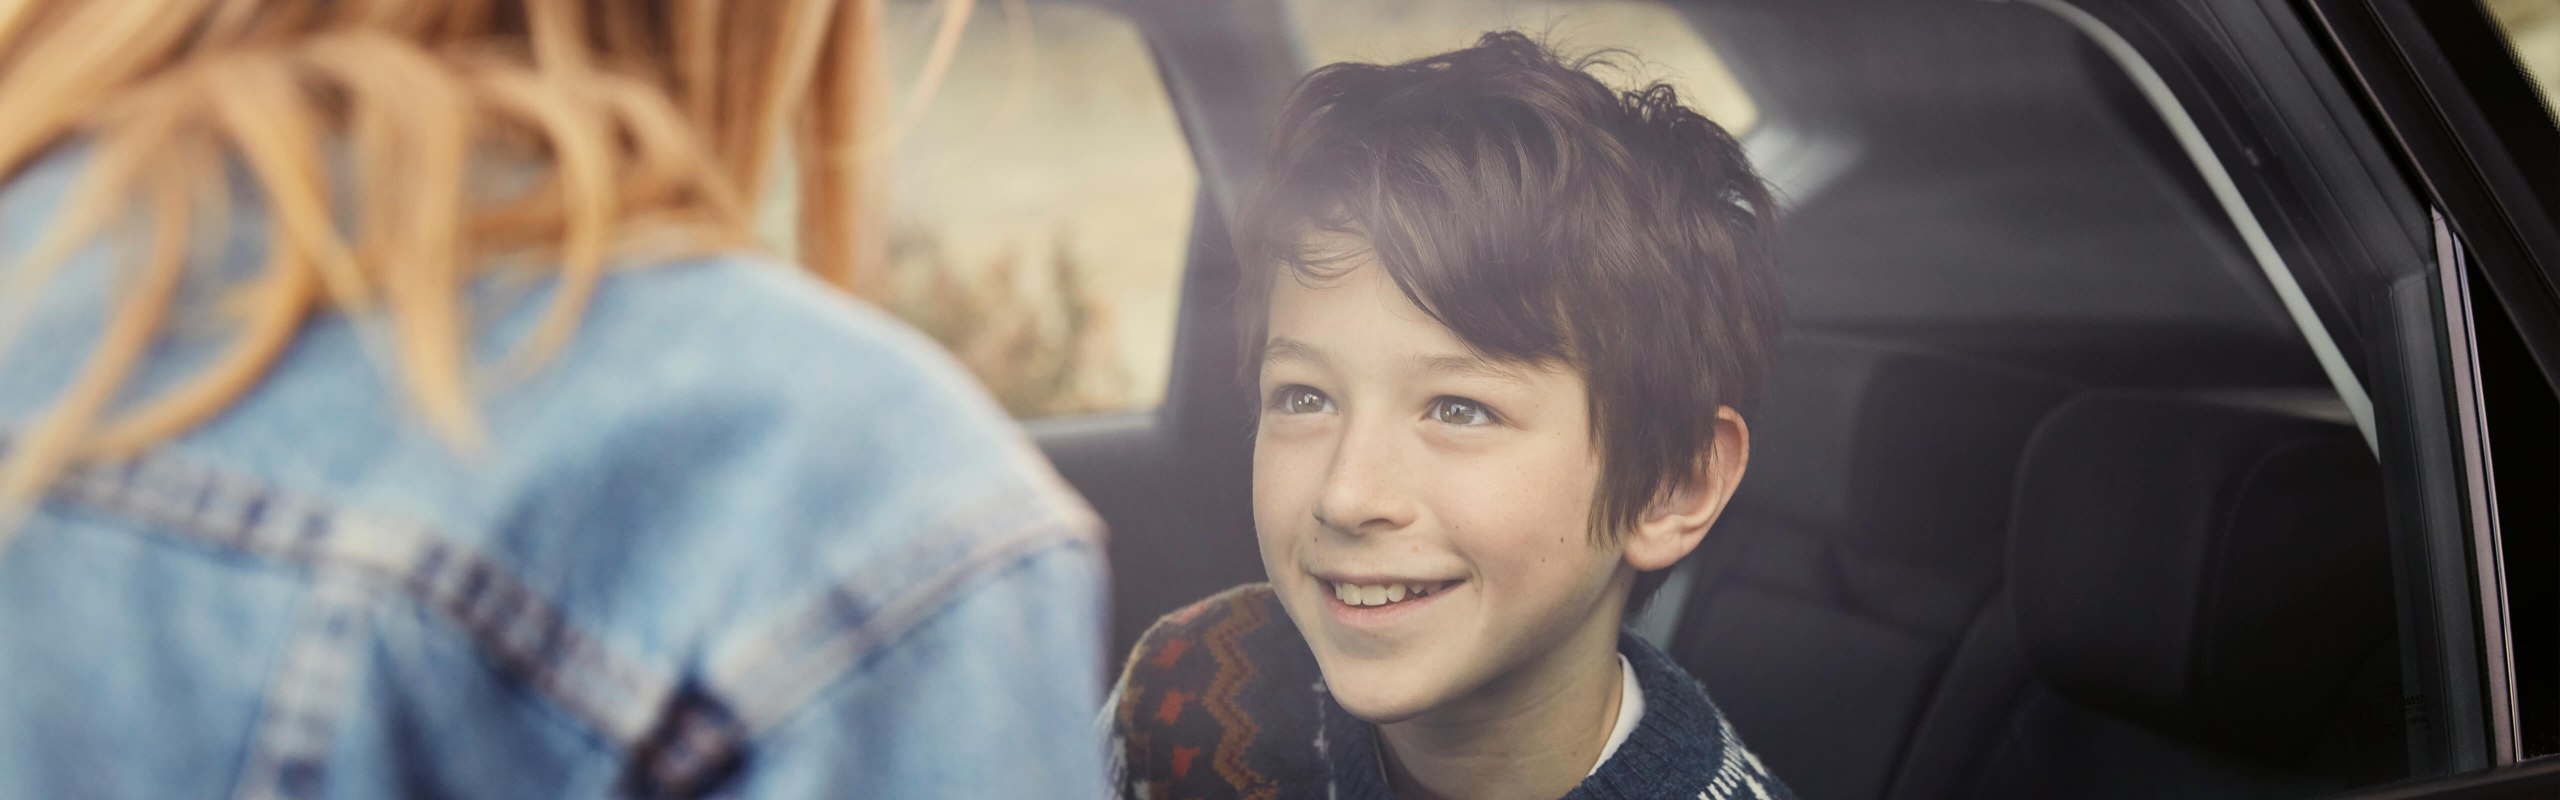 boy sitting on the back seat of a SEAT car looking at a woman